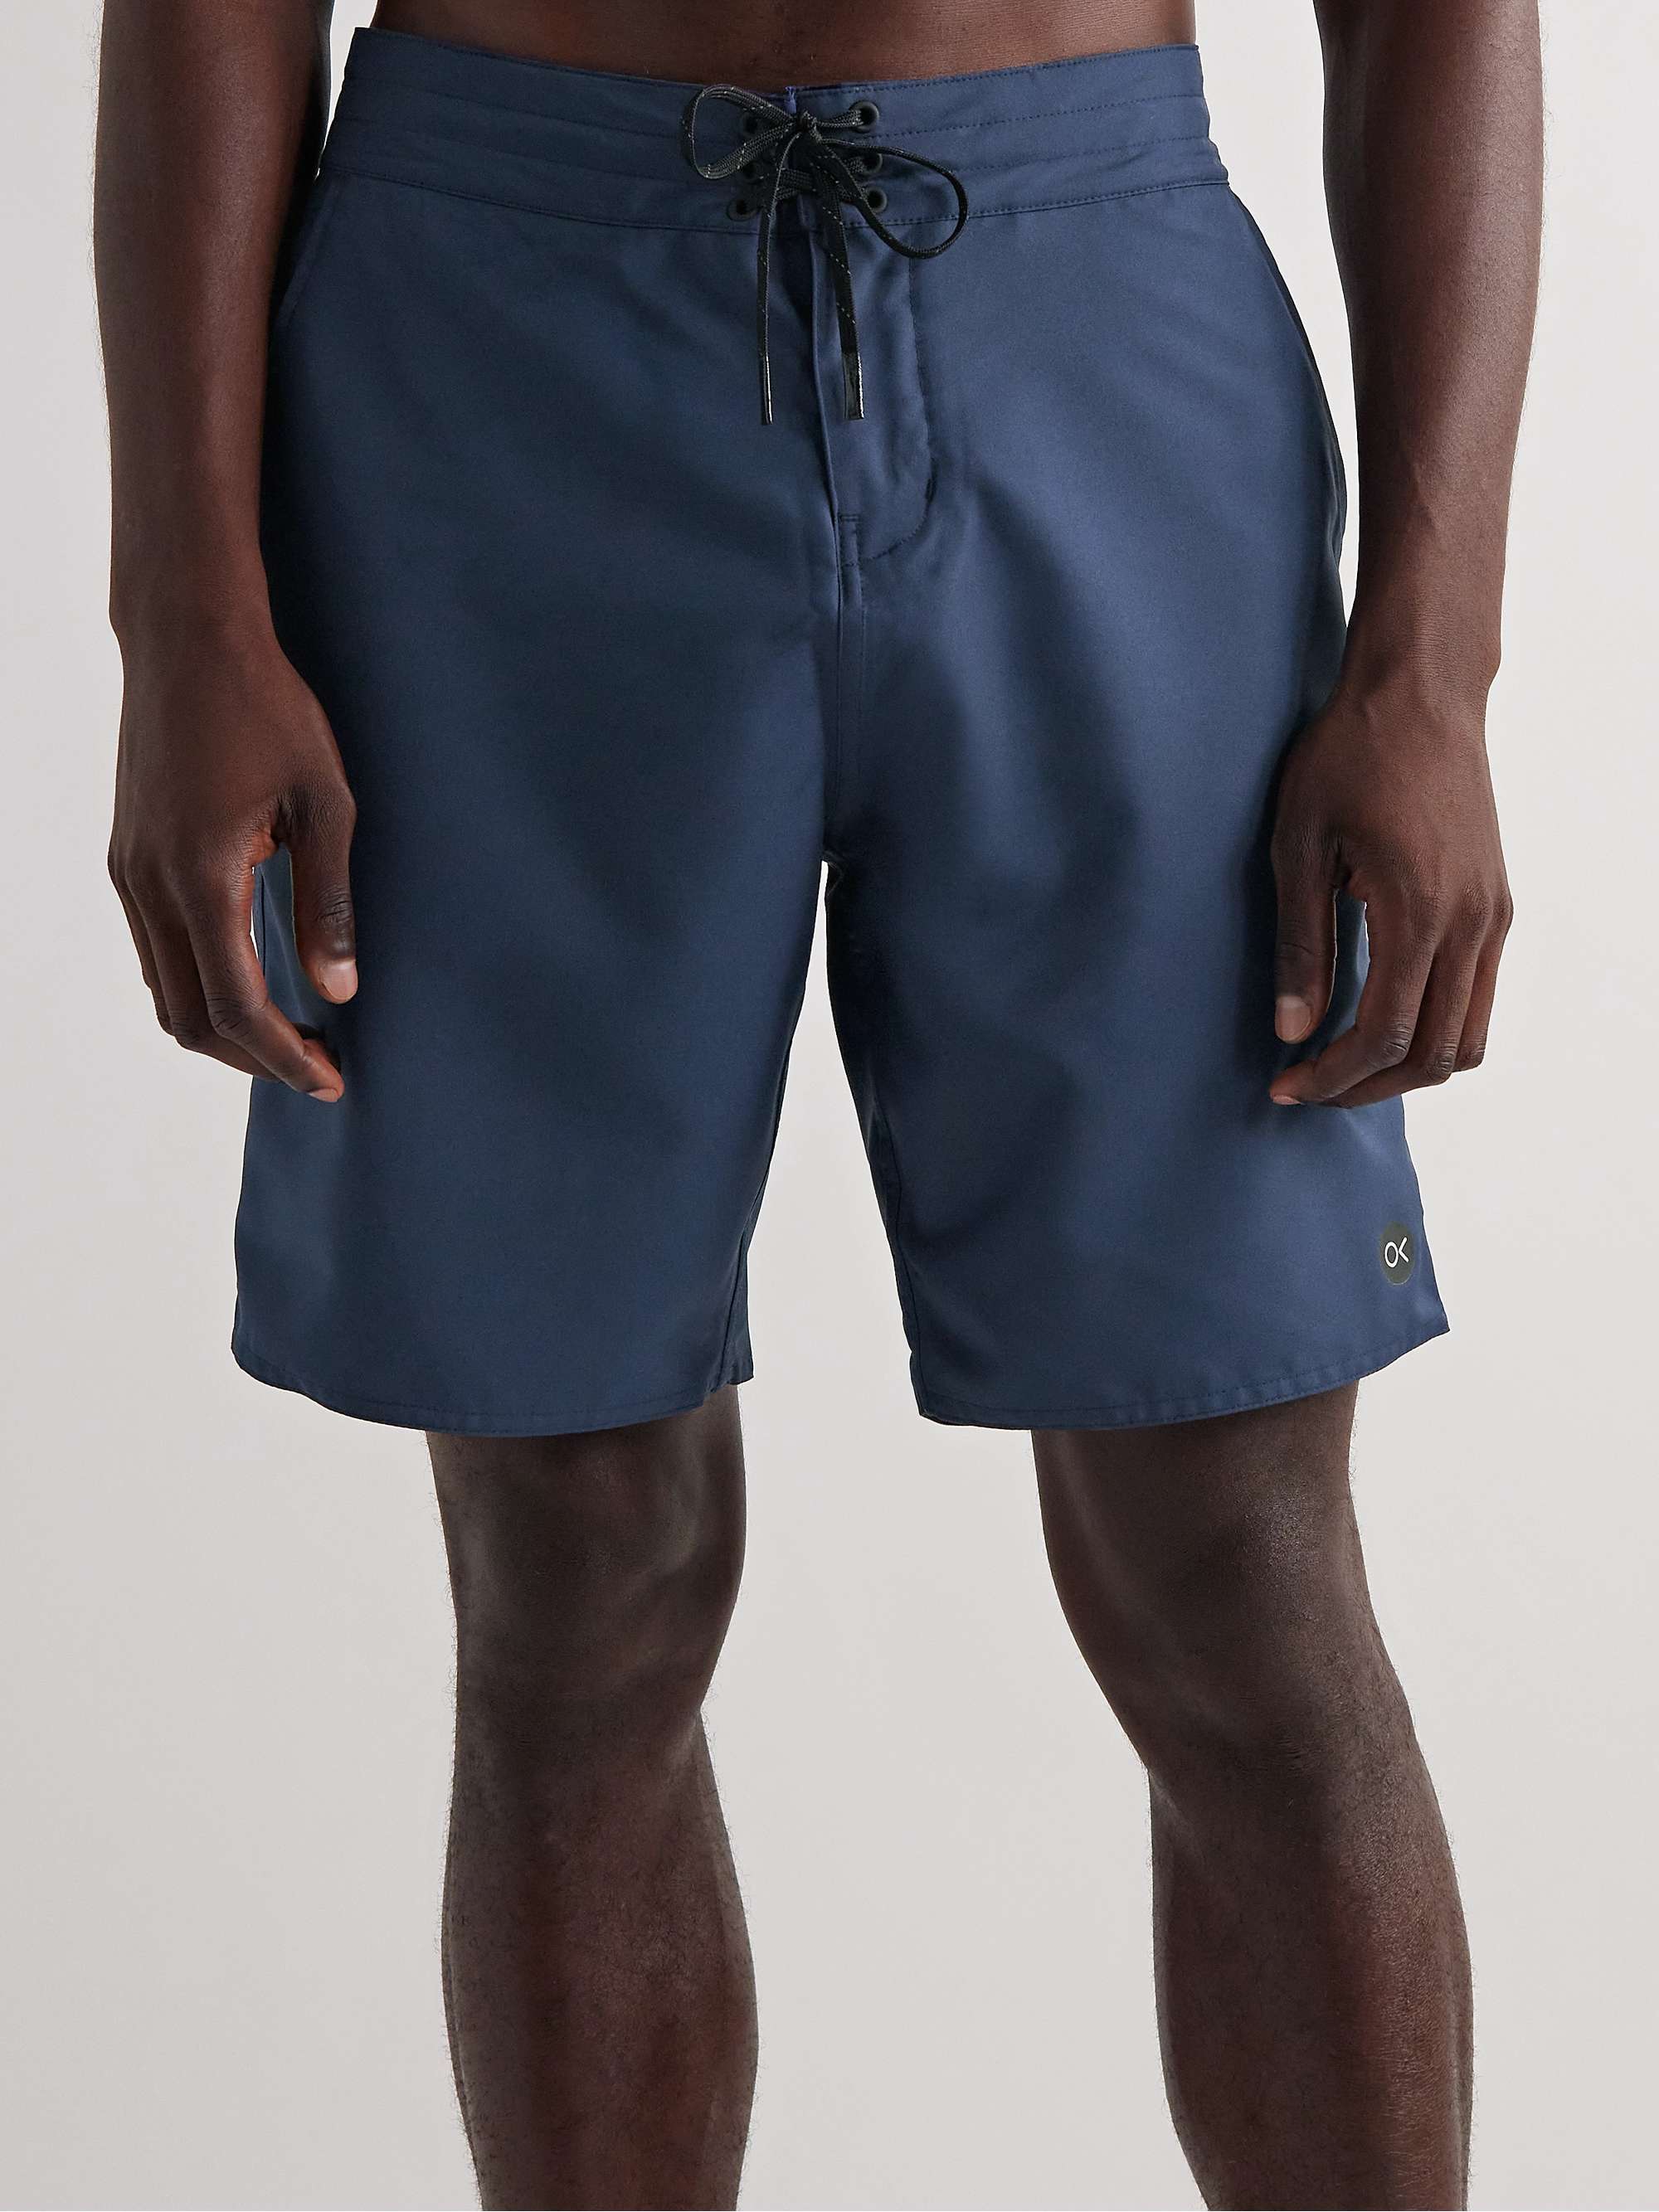 OUTERKNOWN Apex Long-Length Recycled Swim Shorts